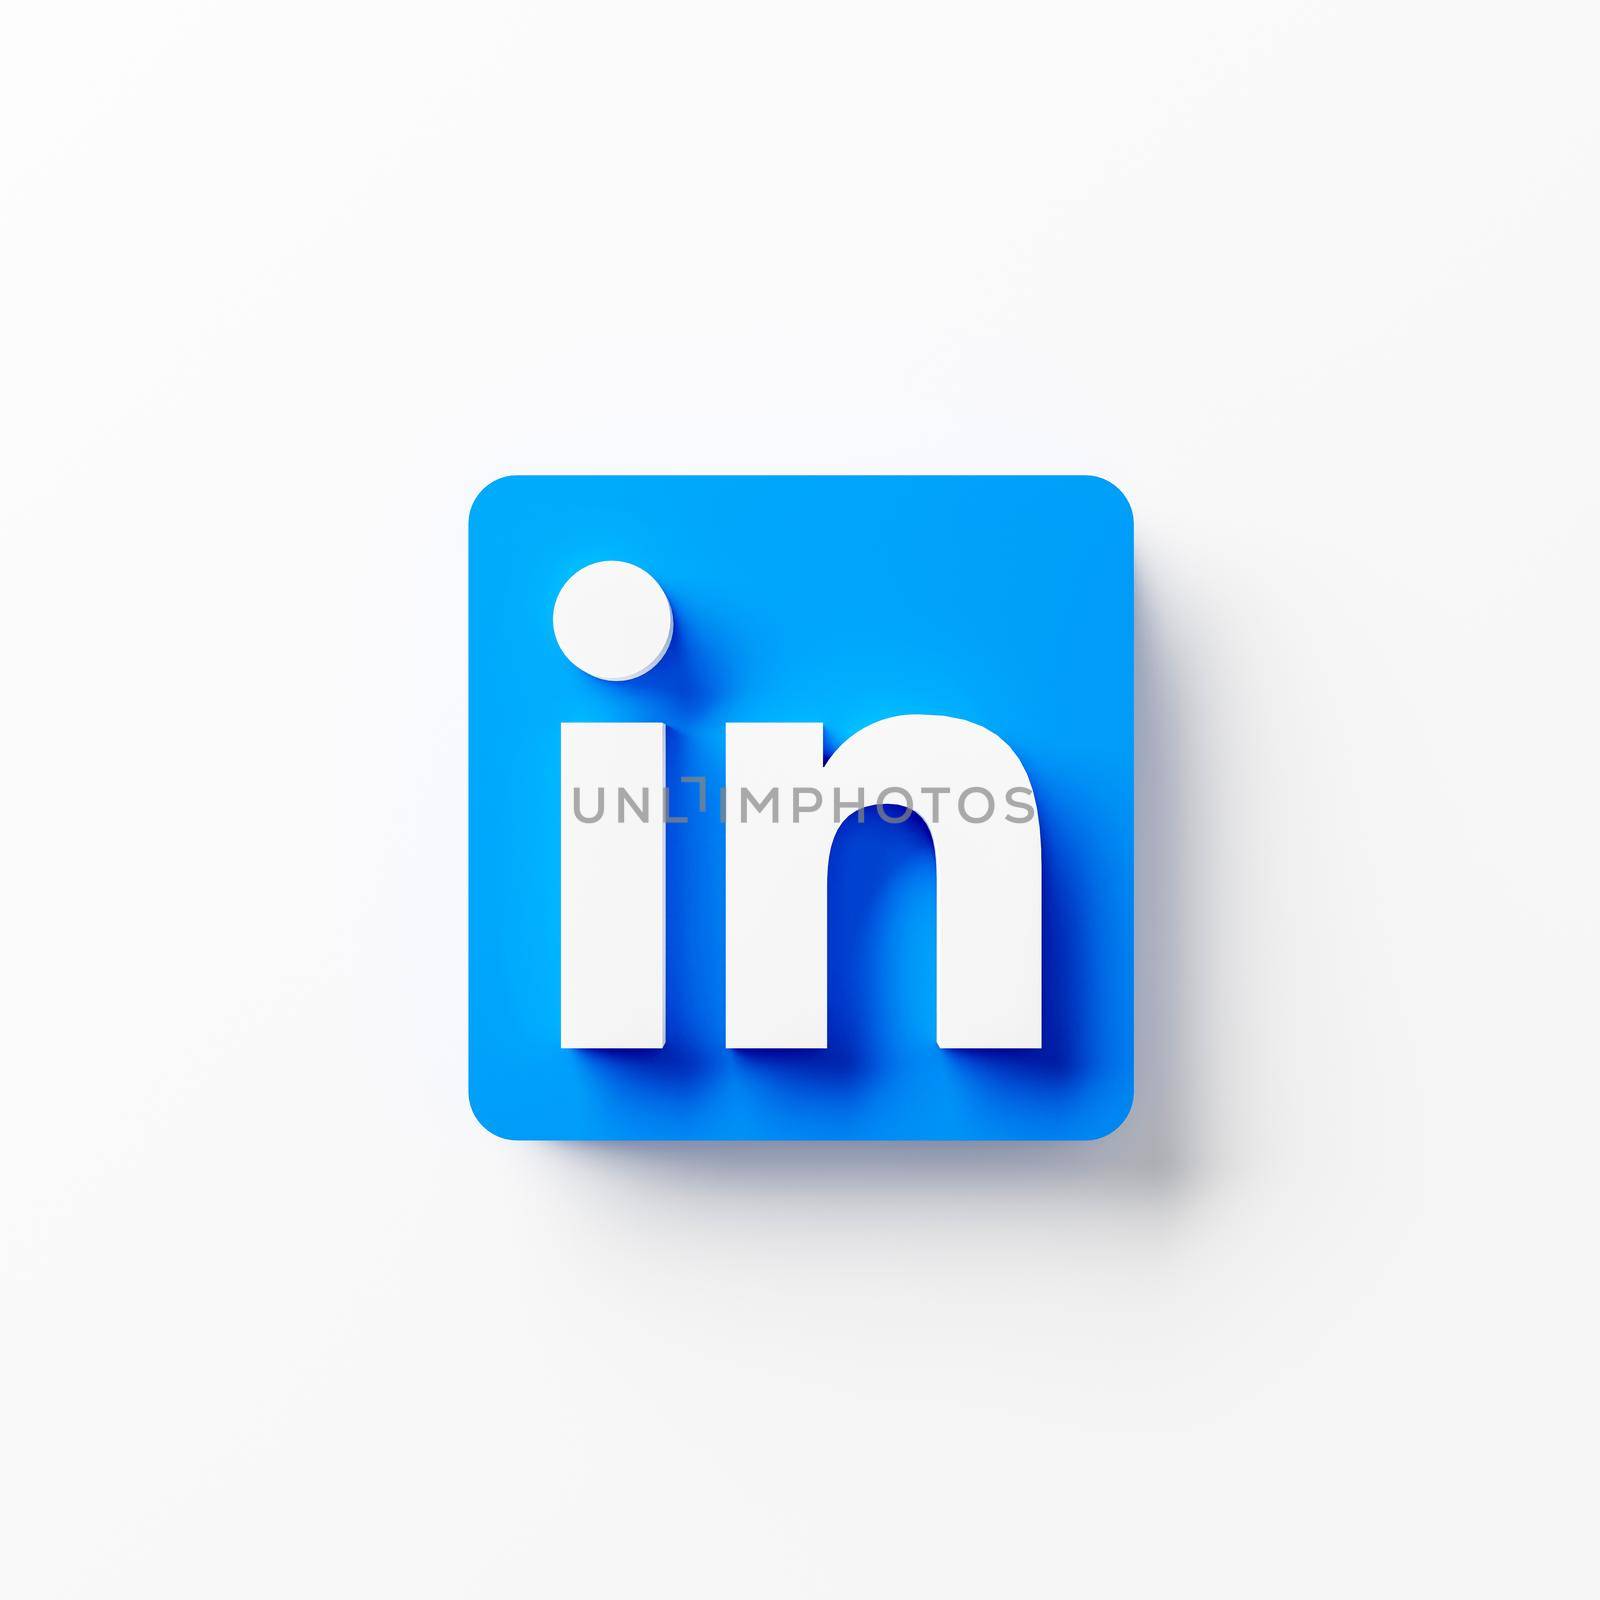 Chonburi, Thailand - JUN 03 , 2021: A close up LinkedIn logo icon on white background. American business and employment-oriented online service via website and mobile app. 3D illustration rendering by MiniStocker